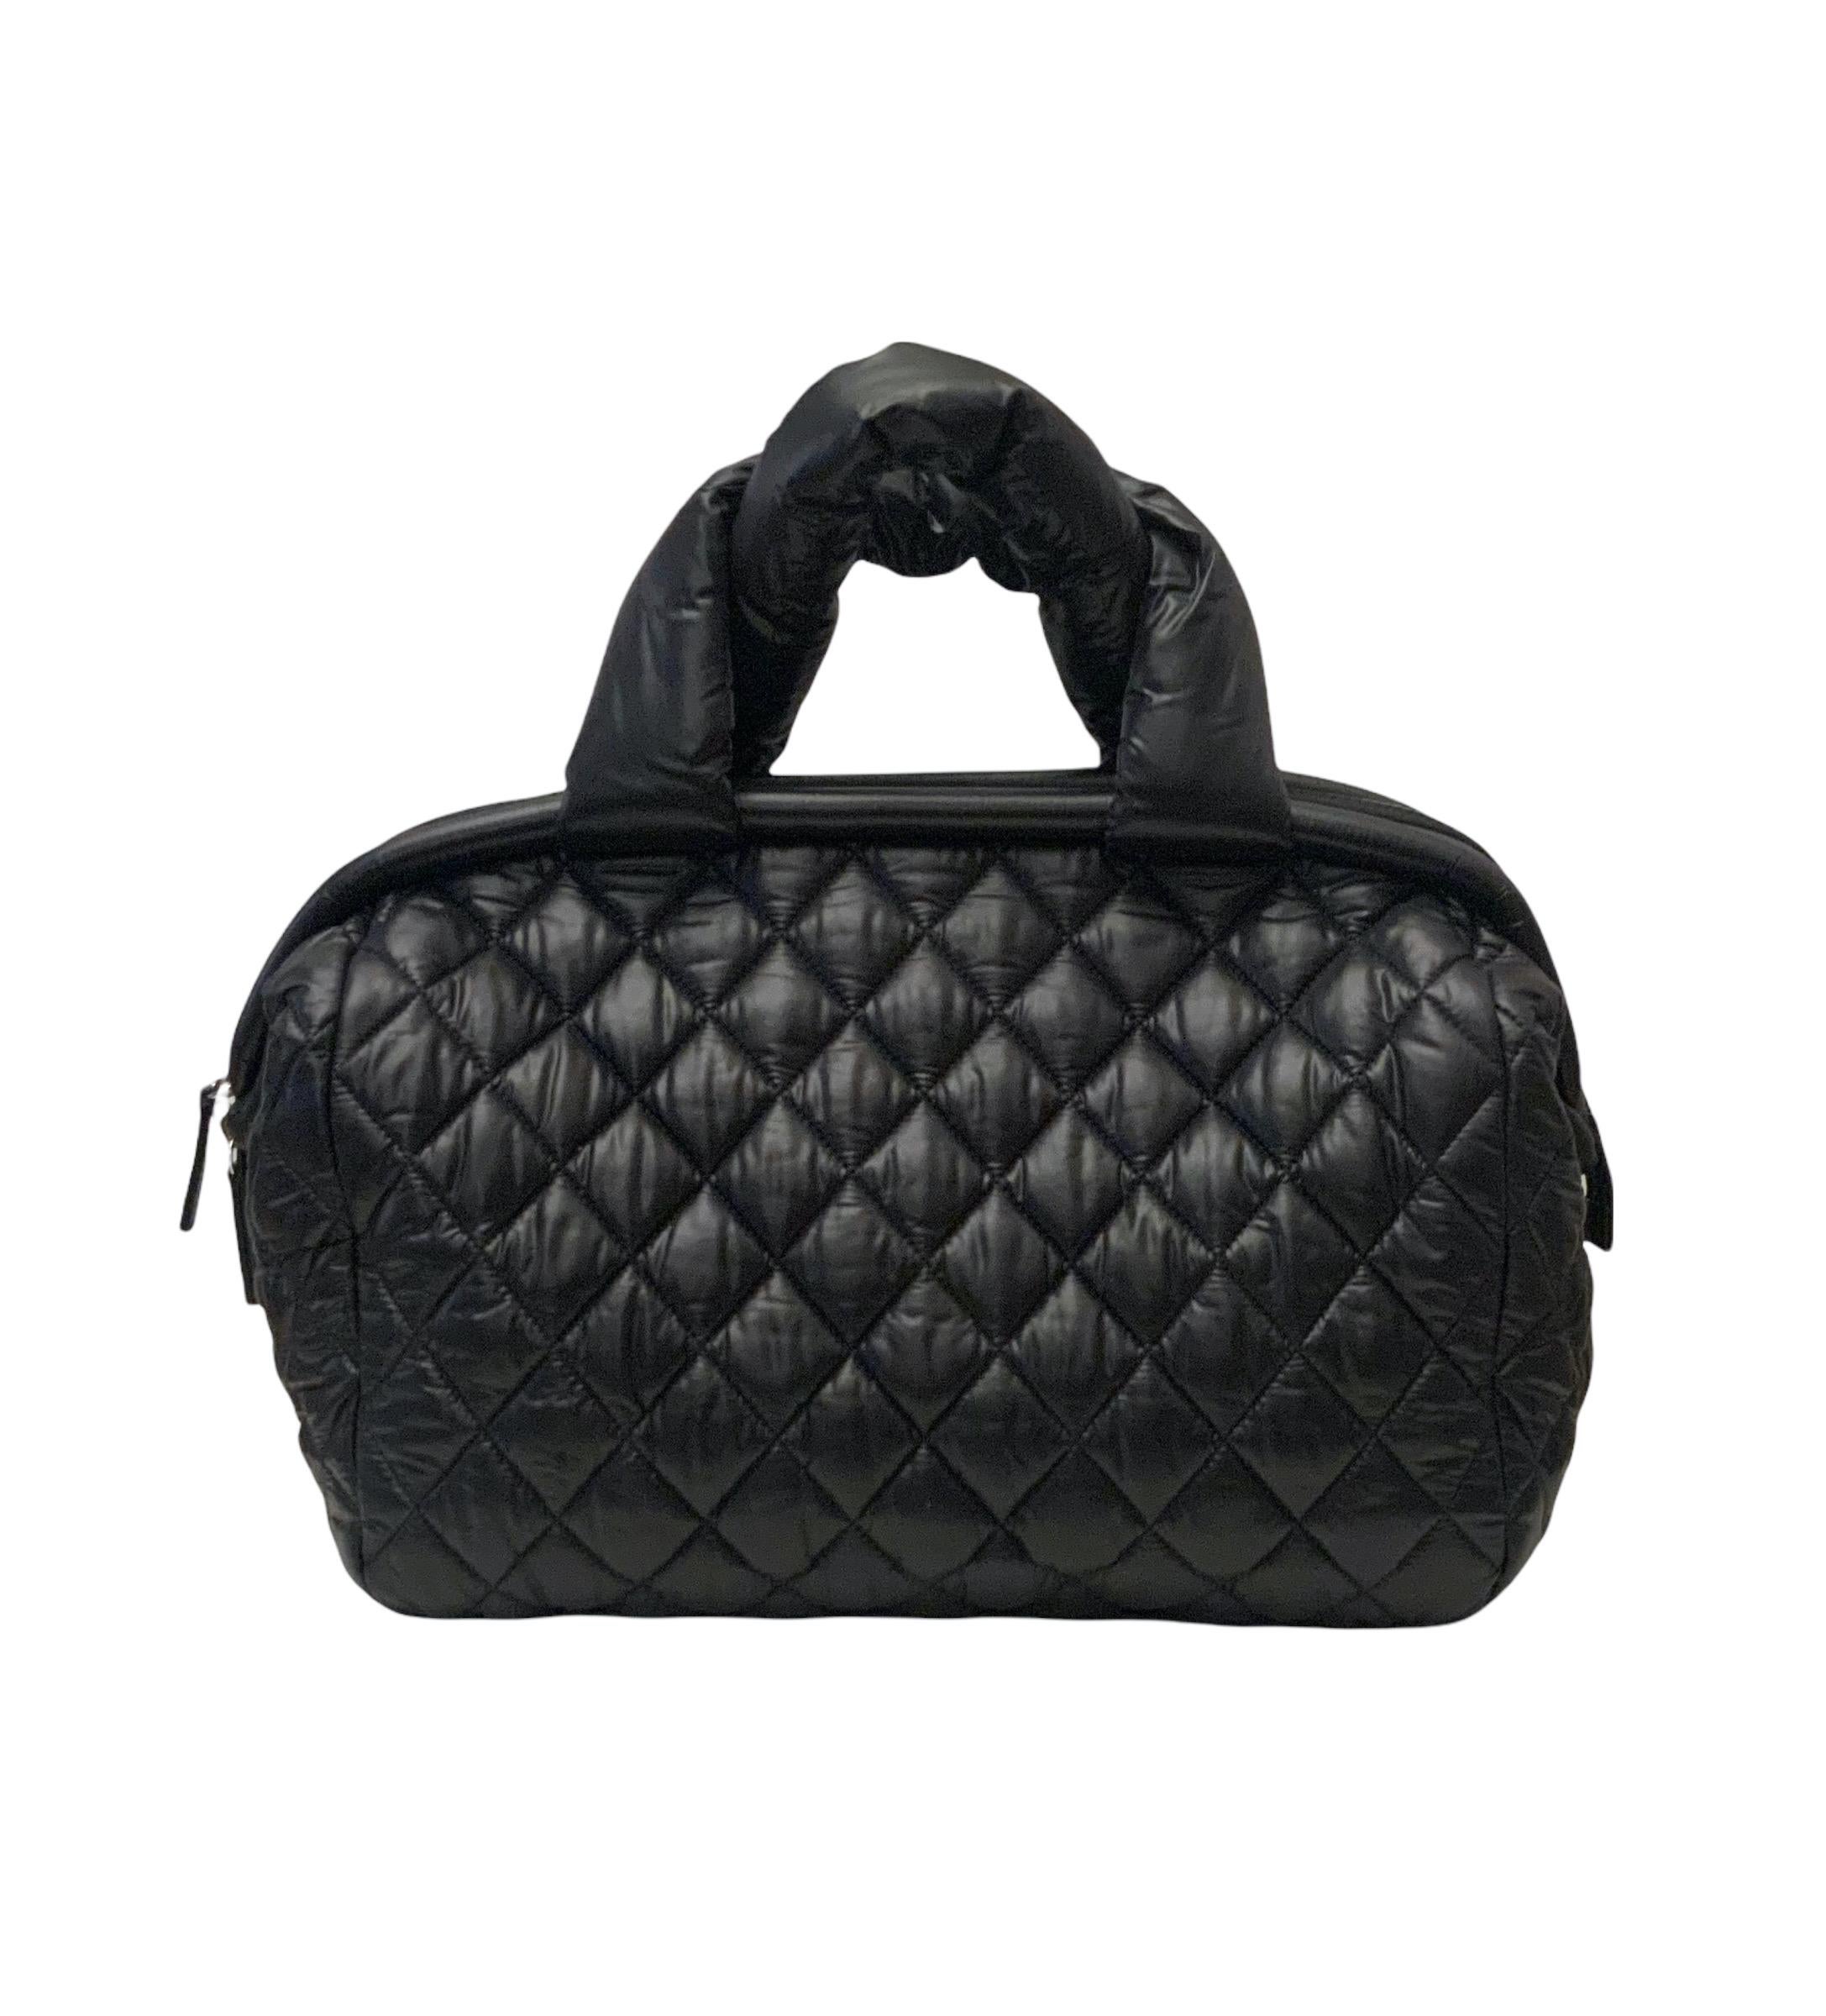 This pre-owned but perfect tote bag from the house of Chanel is part of the Coco Cocoon collection.
It is crafted of padded soft quilted nylon canvas and announced reversible !
It features padded top handles, an exterior zipper pocket lined with